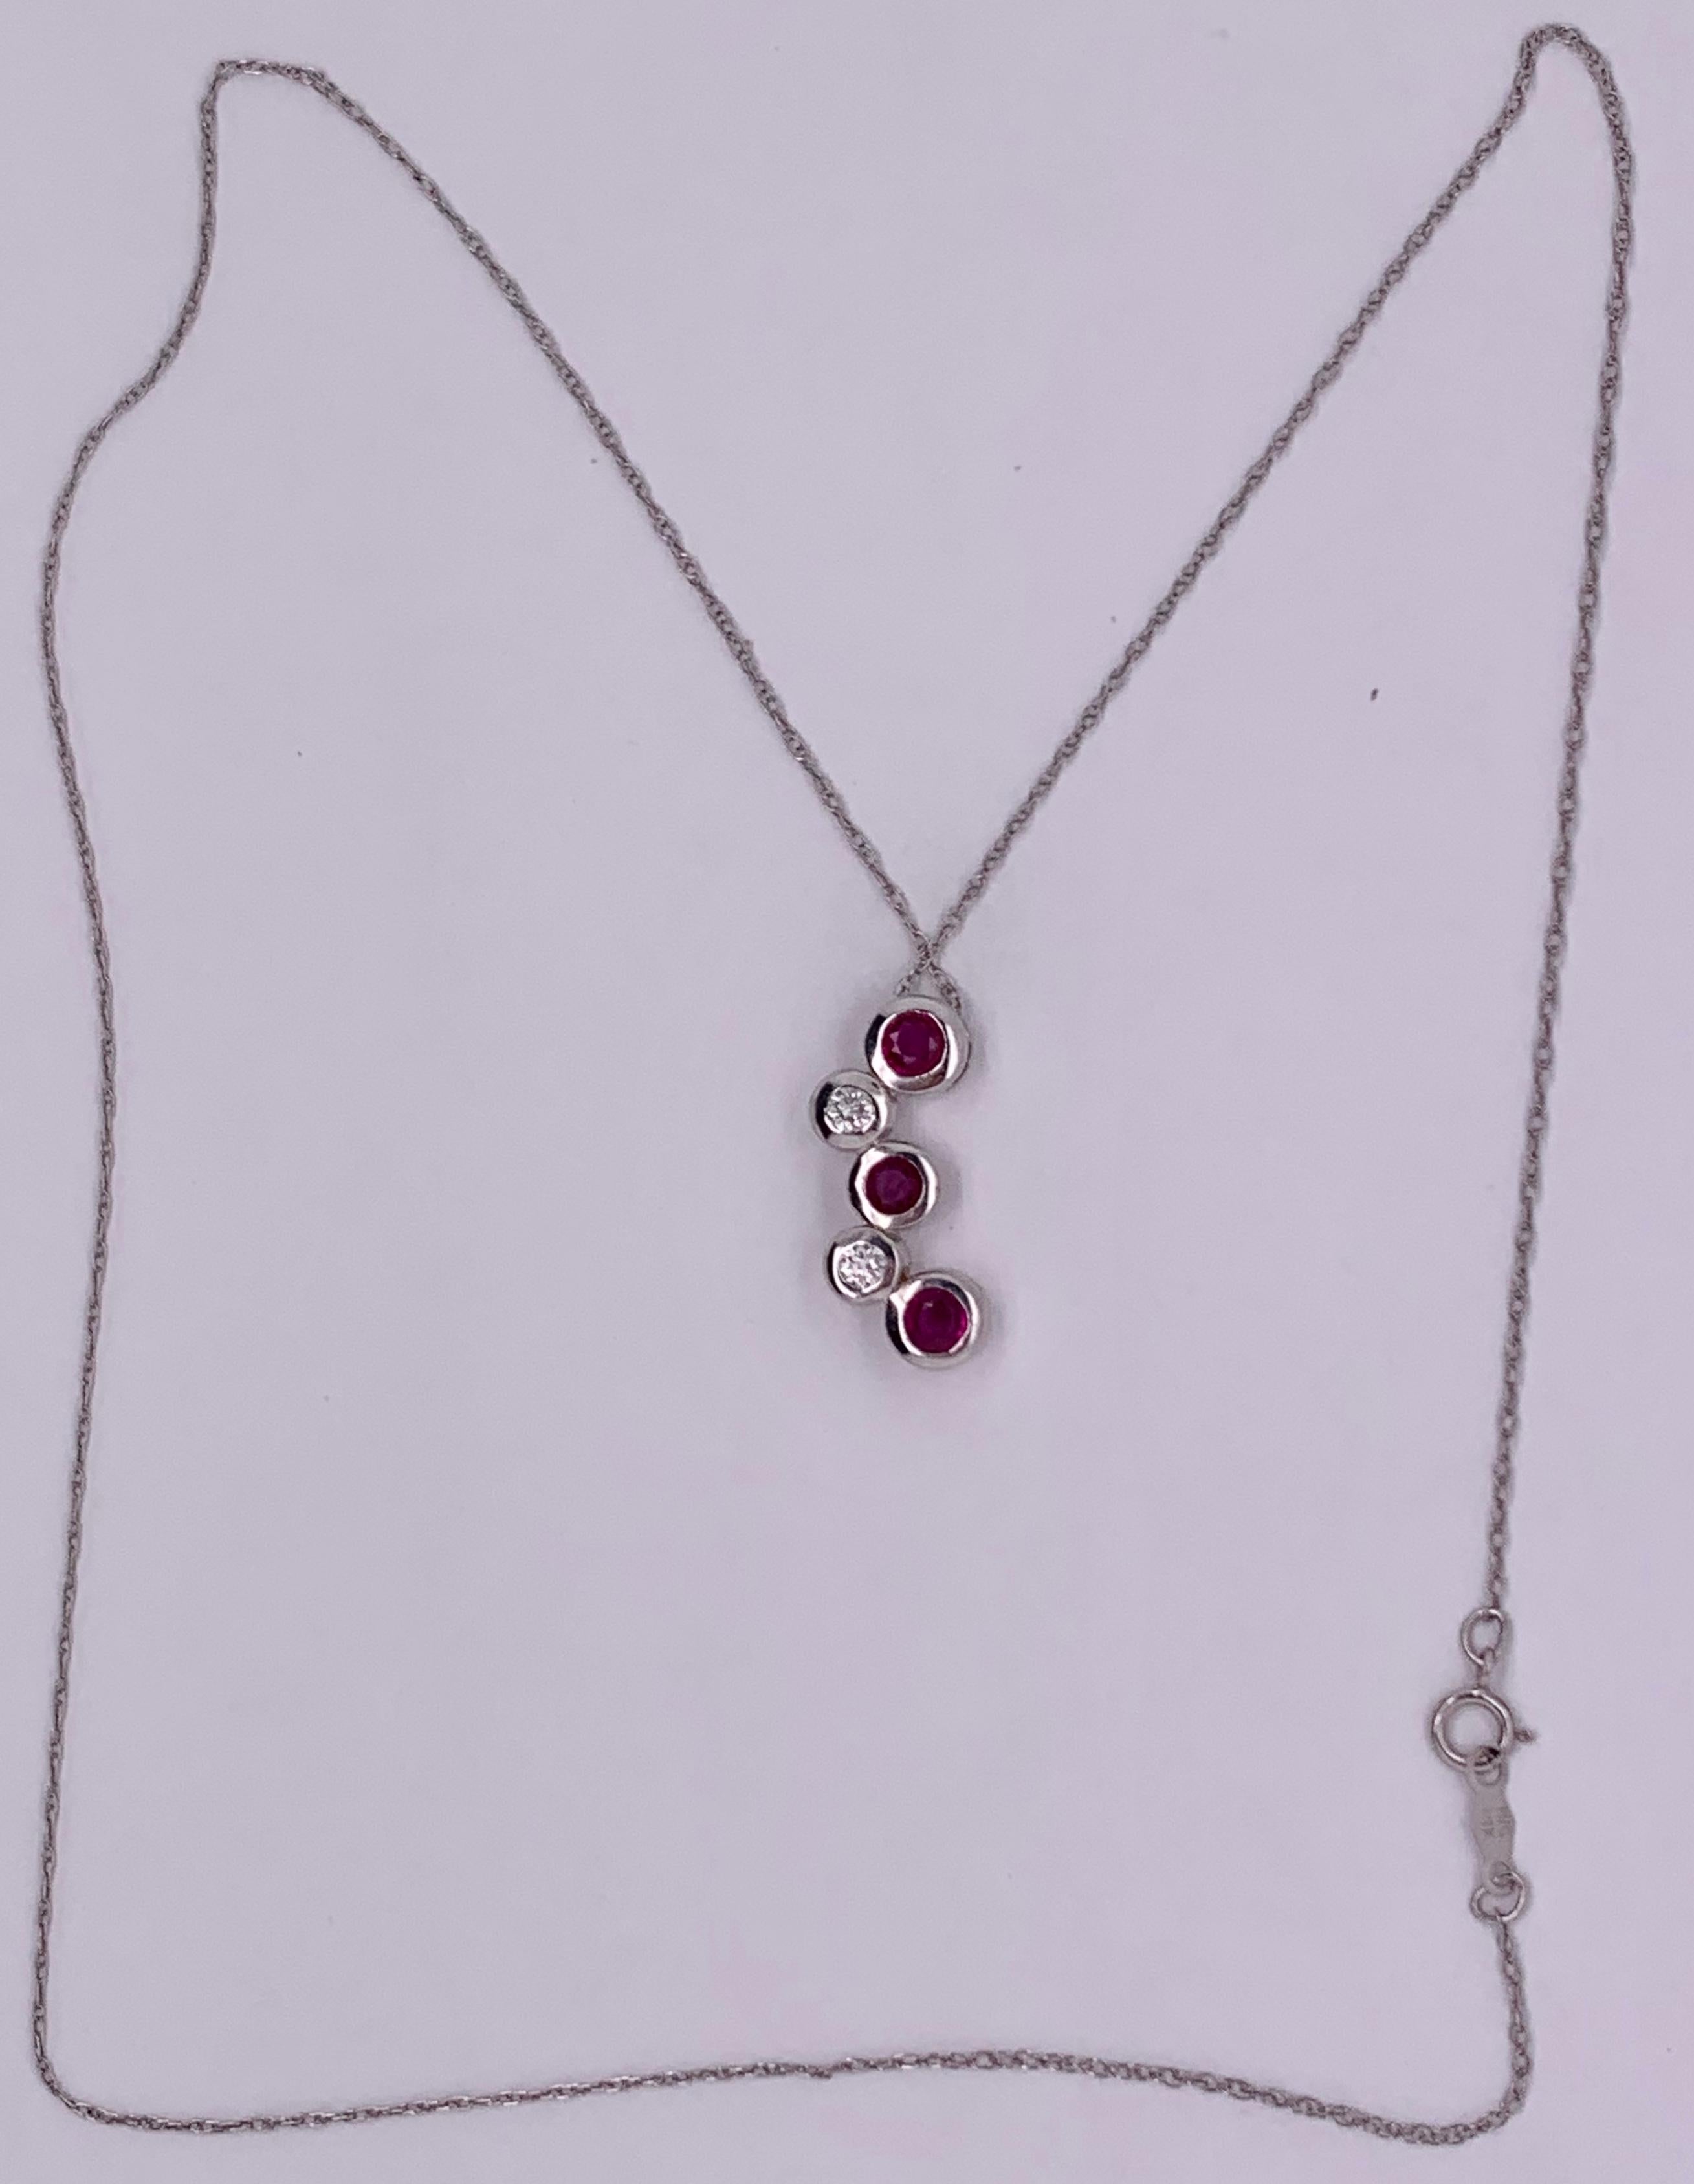 14kt Gold 3 Ruby and 2 Diamond, .14TDW Necklace 4 Grams Total on a 16 inch Necklace. 